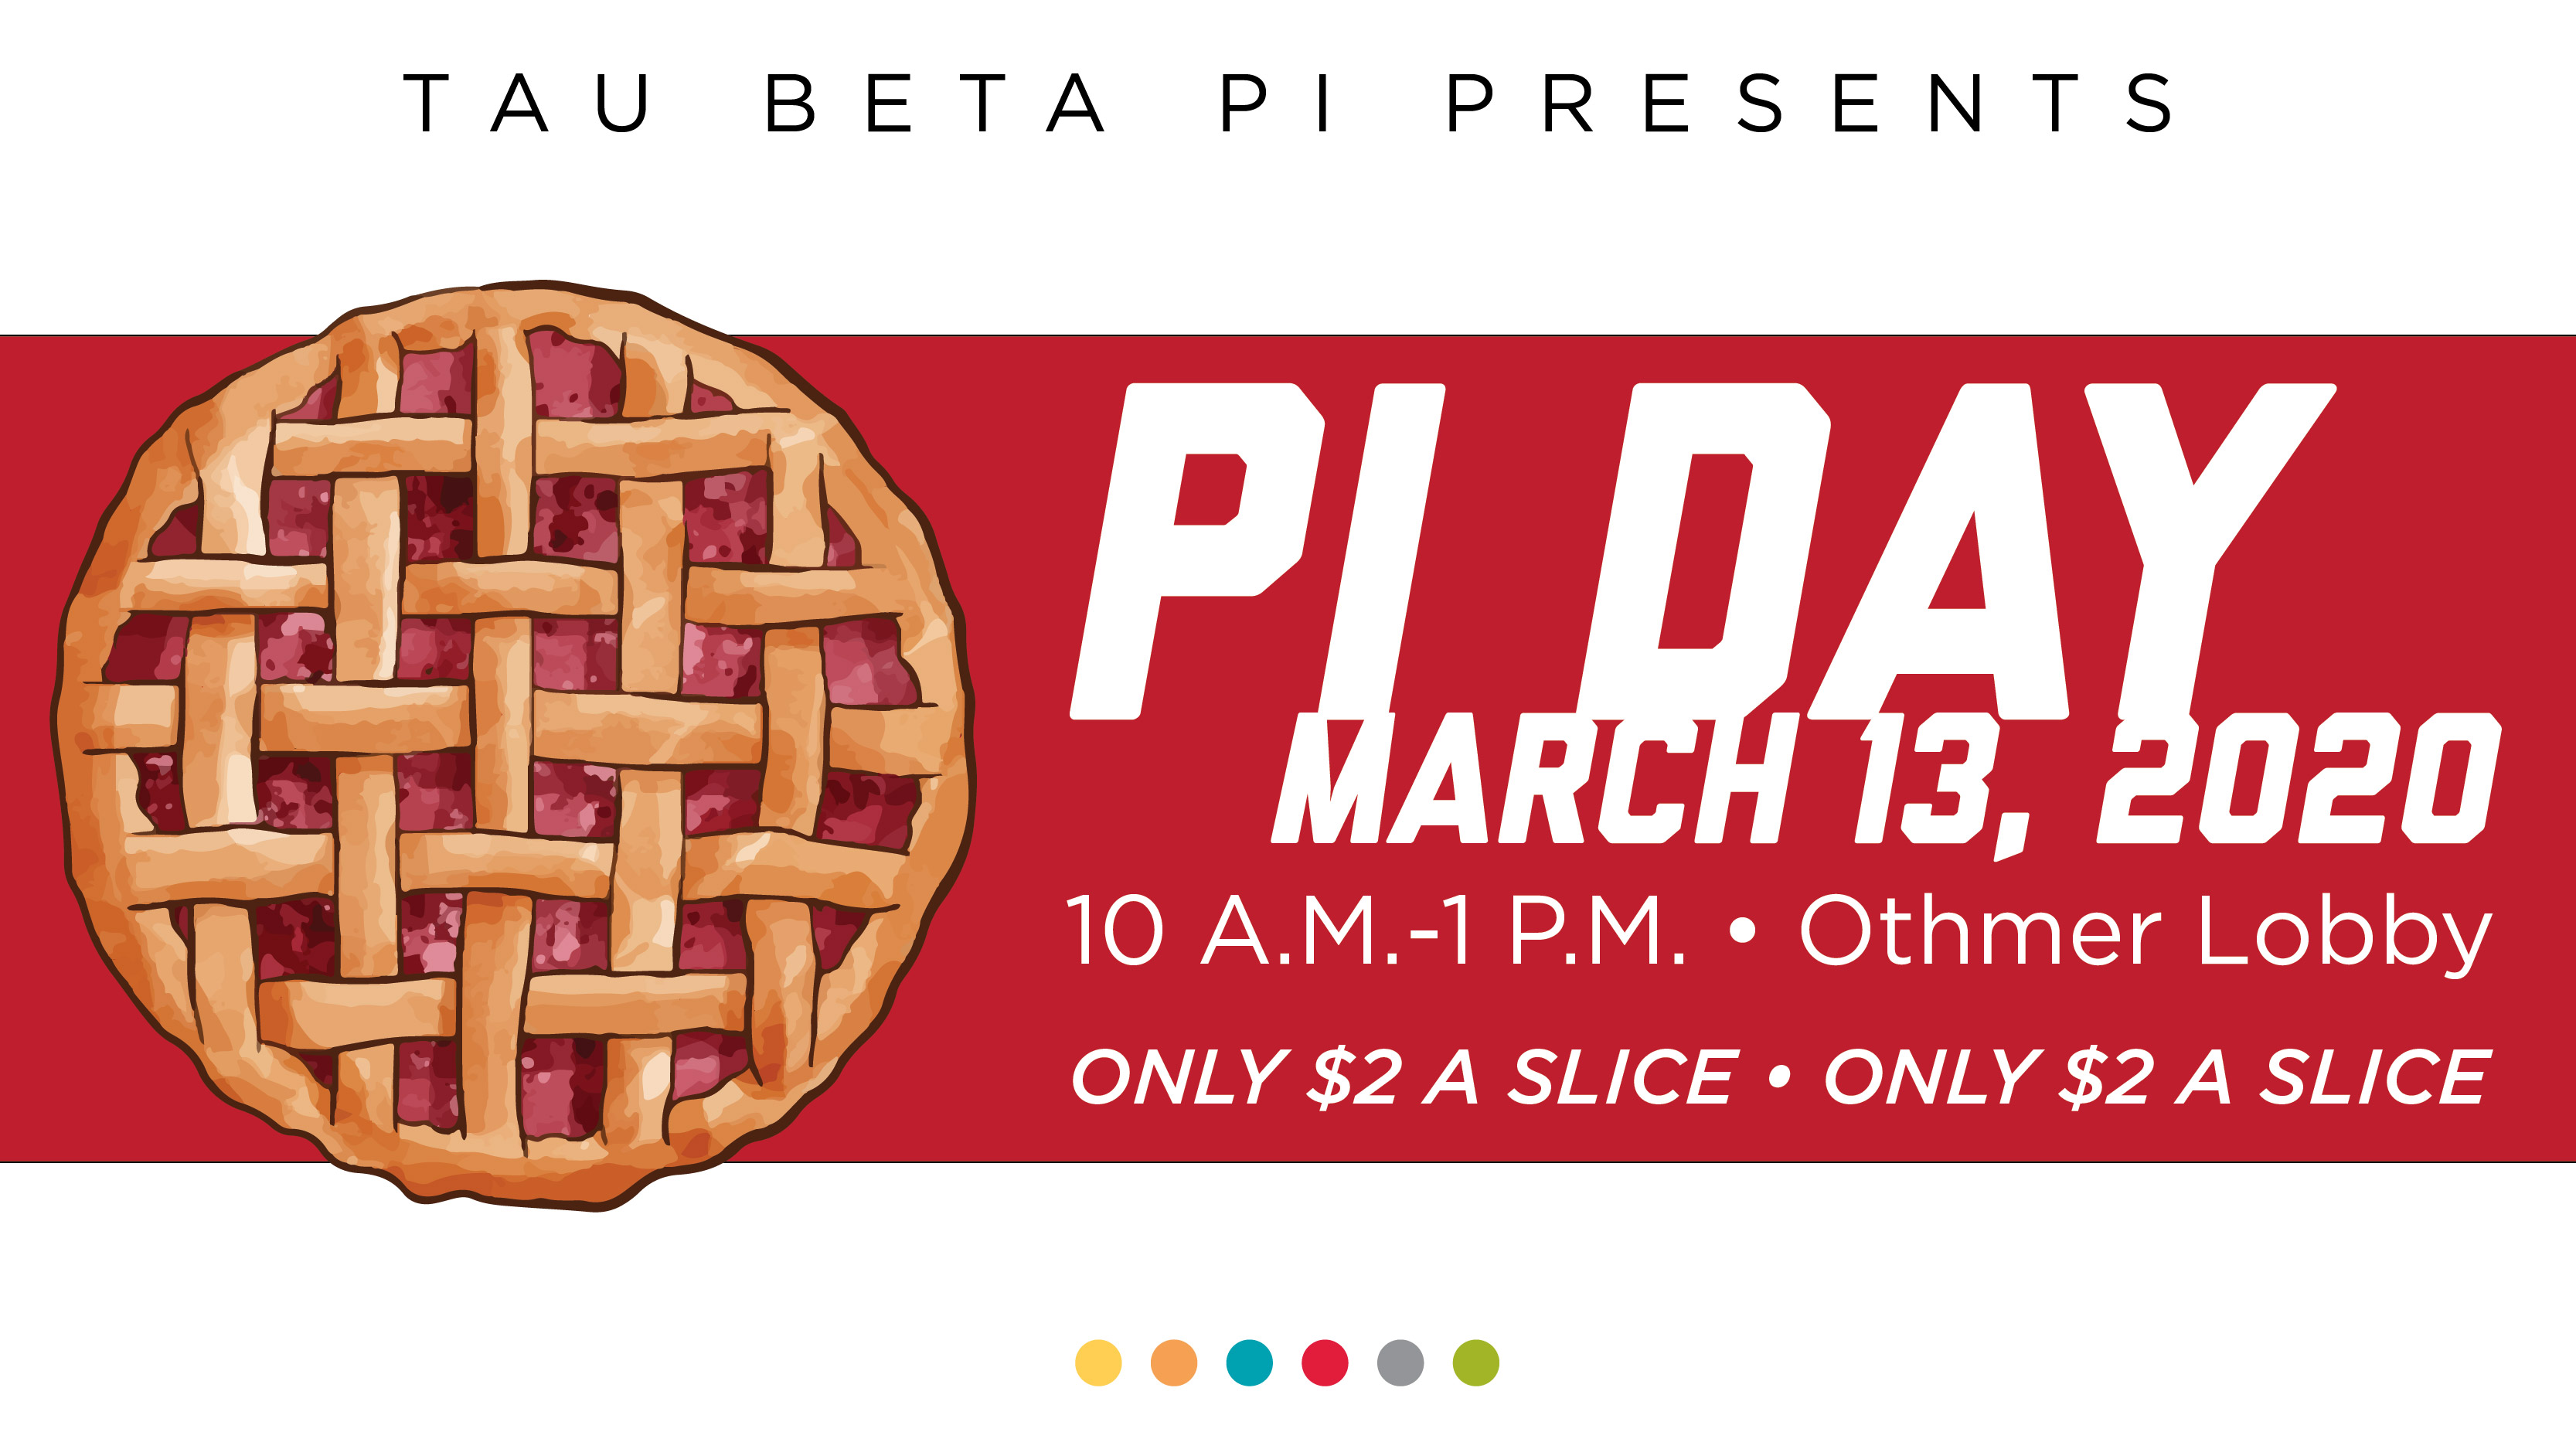 Tau Beta Pi selling Pi Day pie slices on March 13.